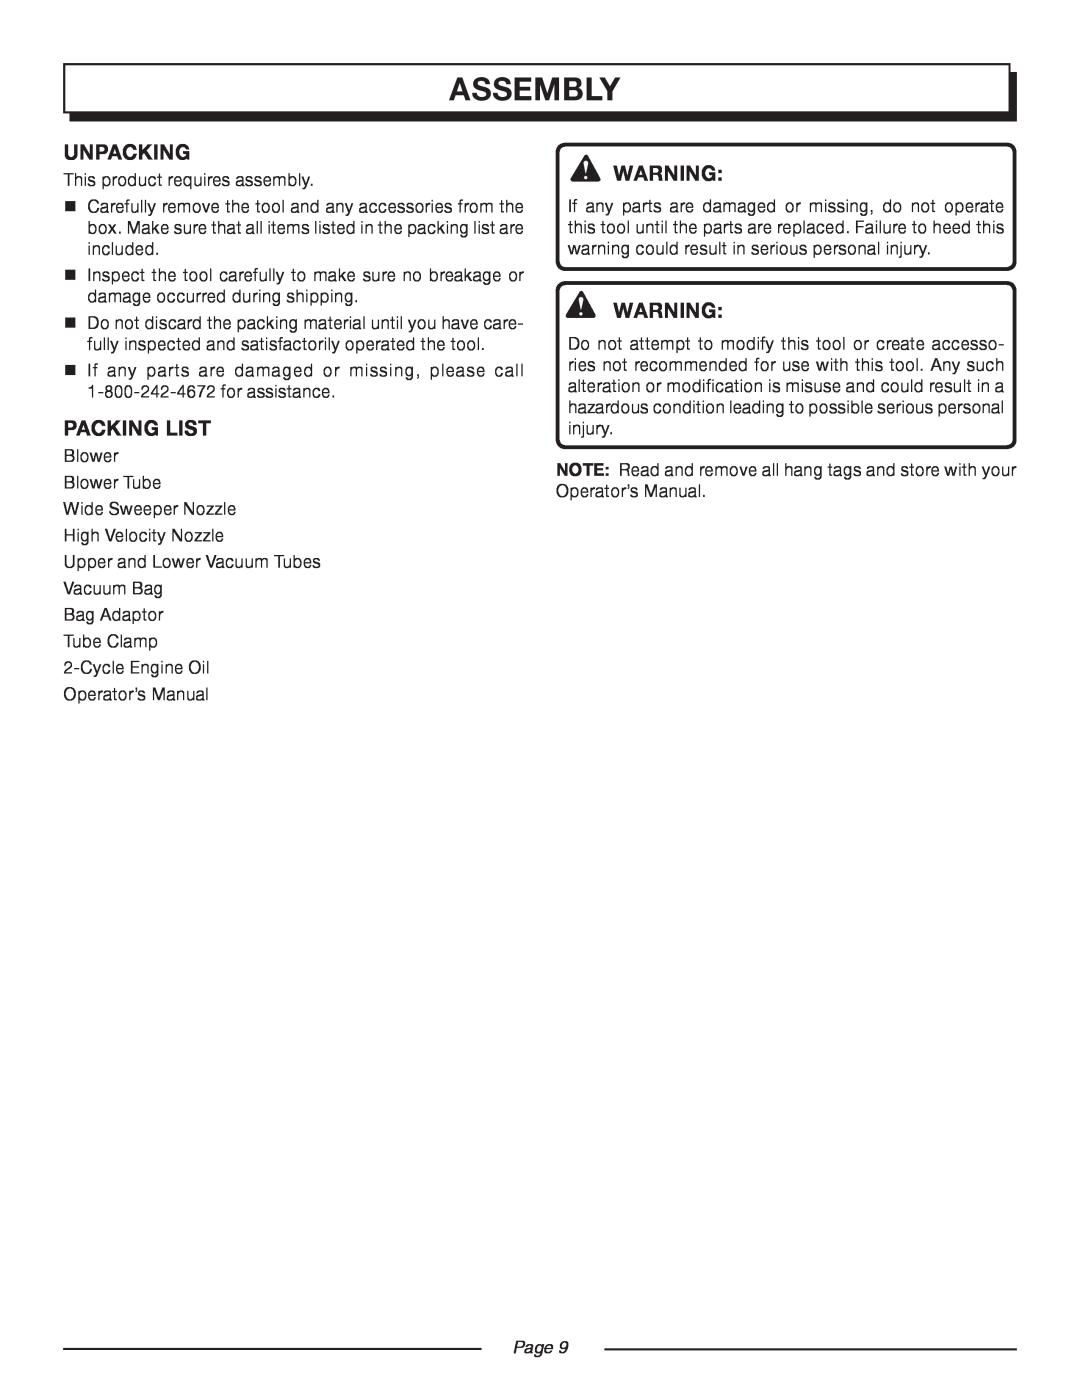 Homelite UT08947 manual Assembly, Unpacking, Packing List, Page 